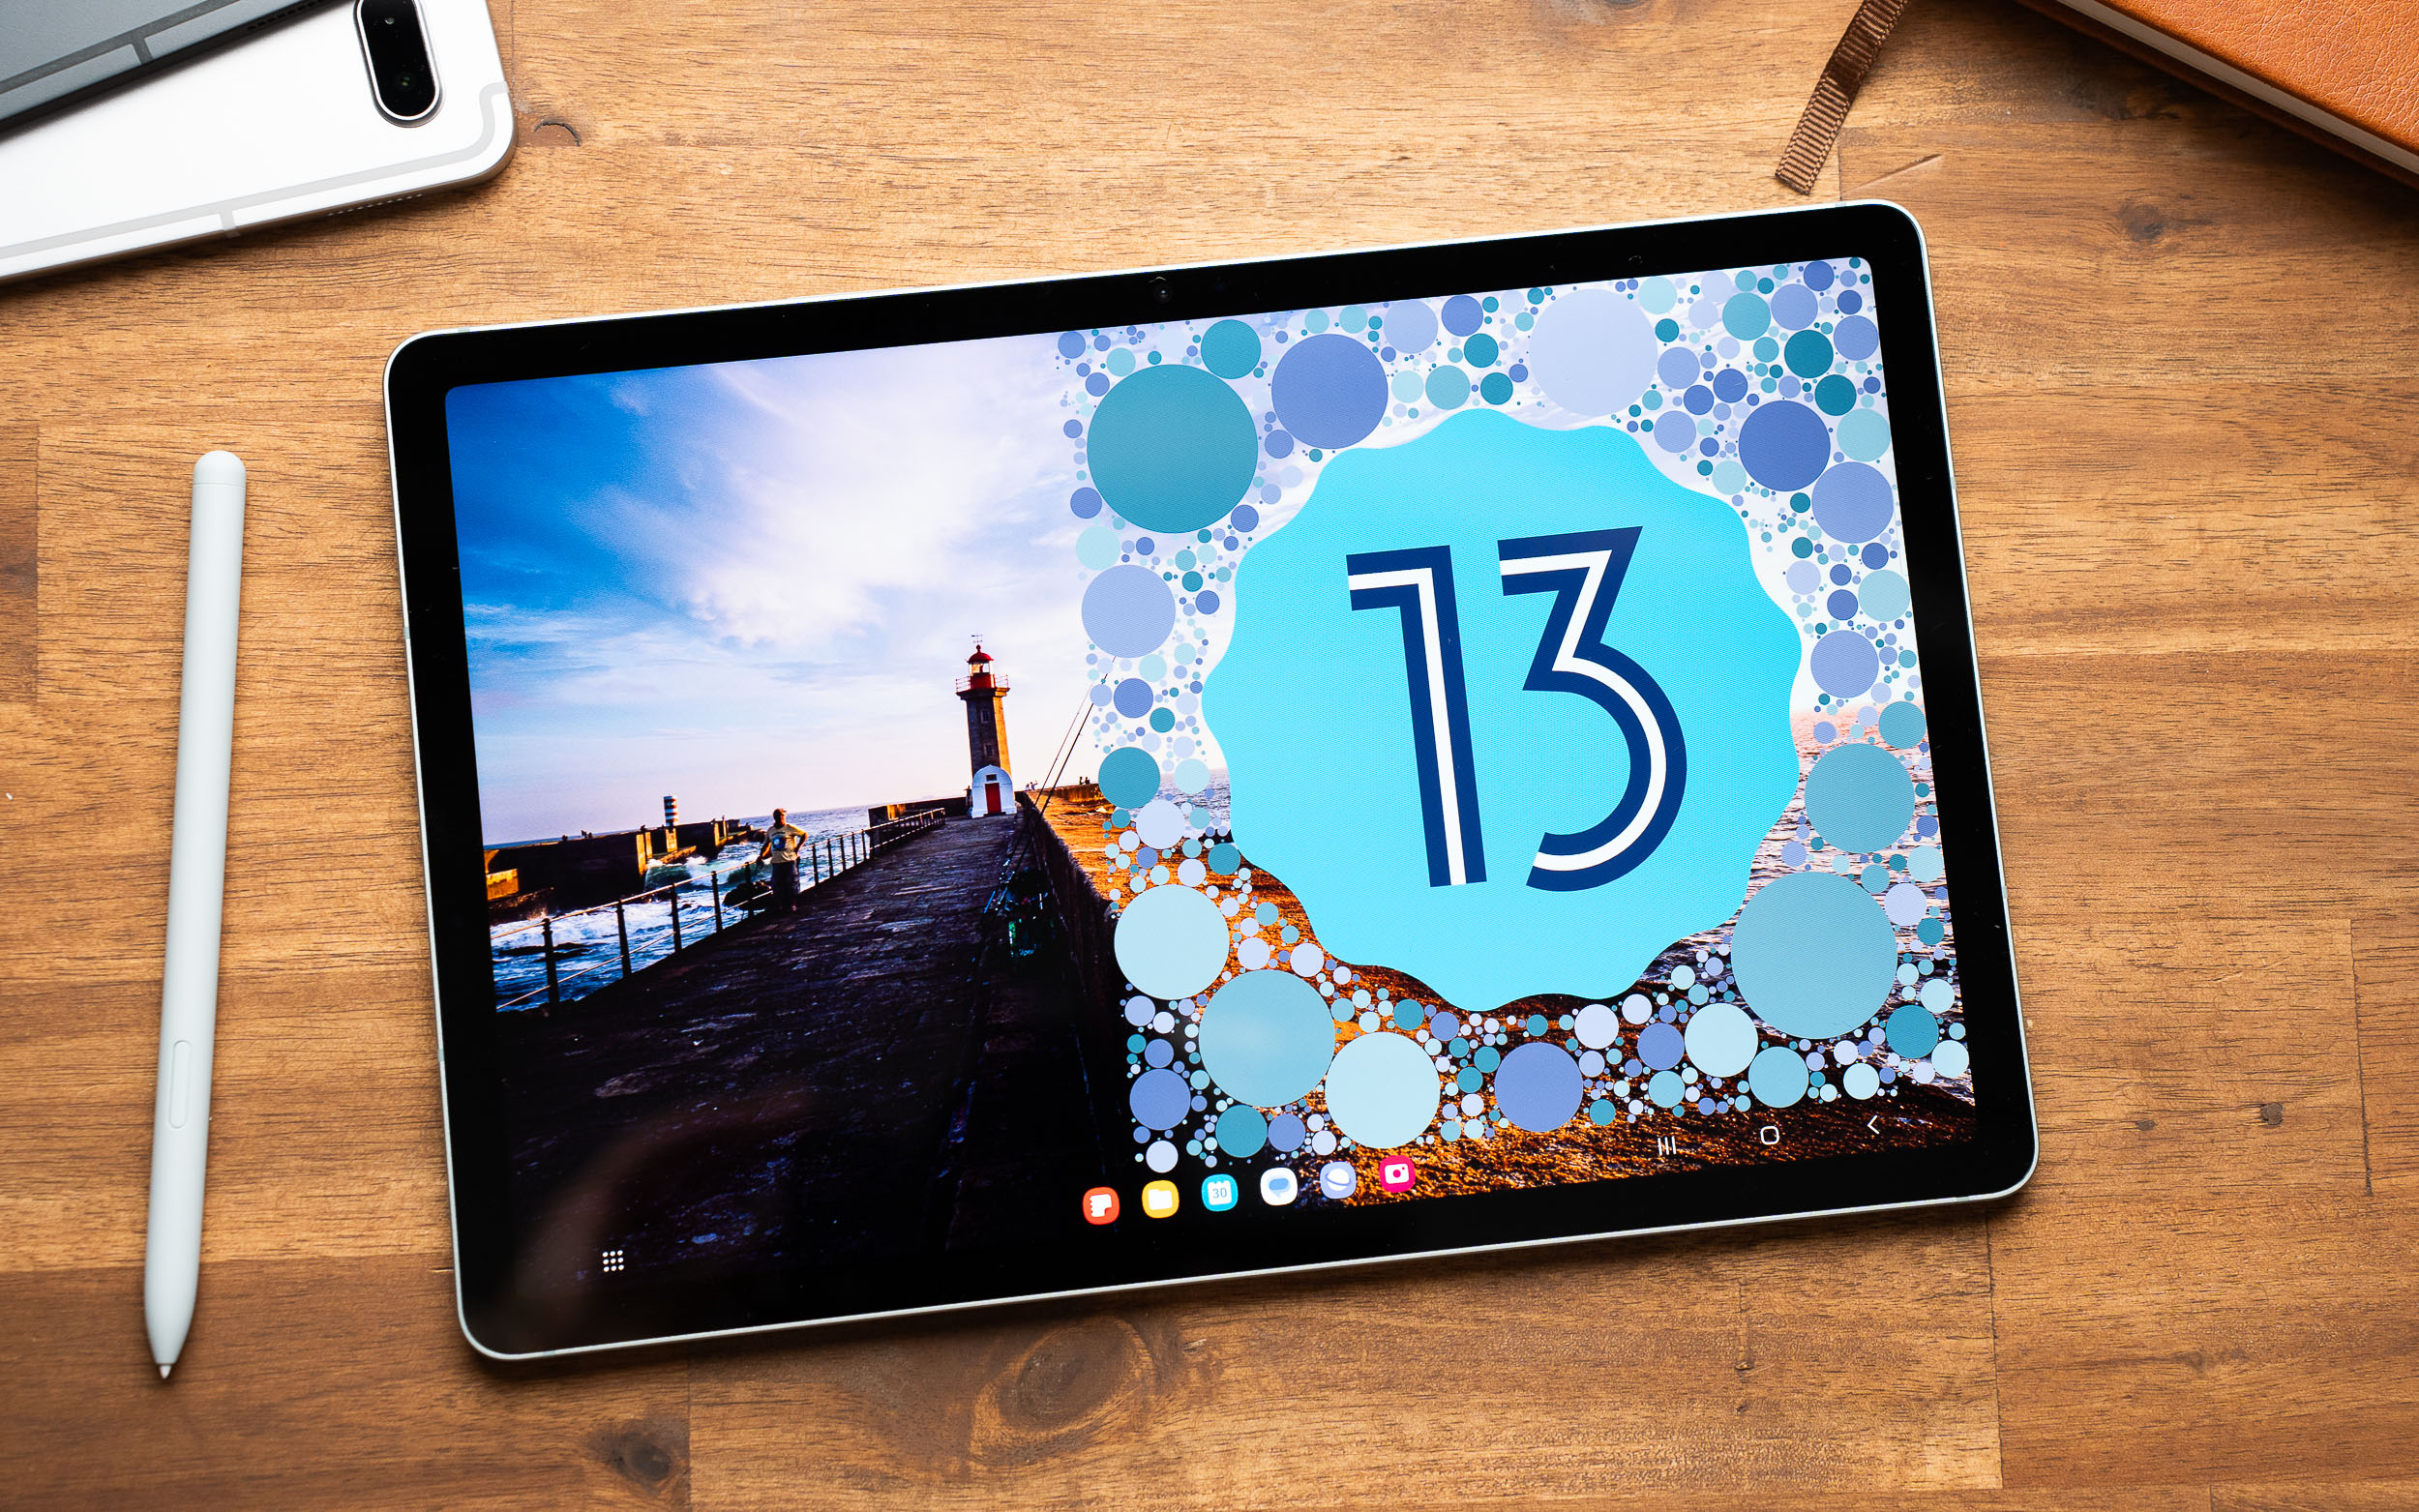 Samsung Galaxy Tab S9 FE with Android 13